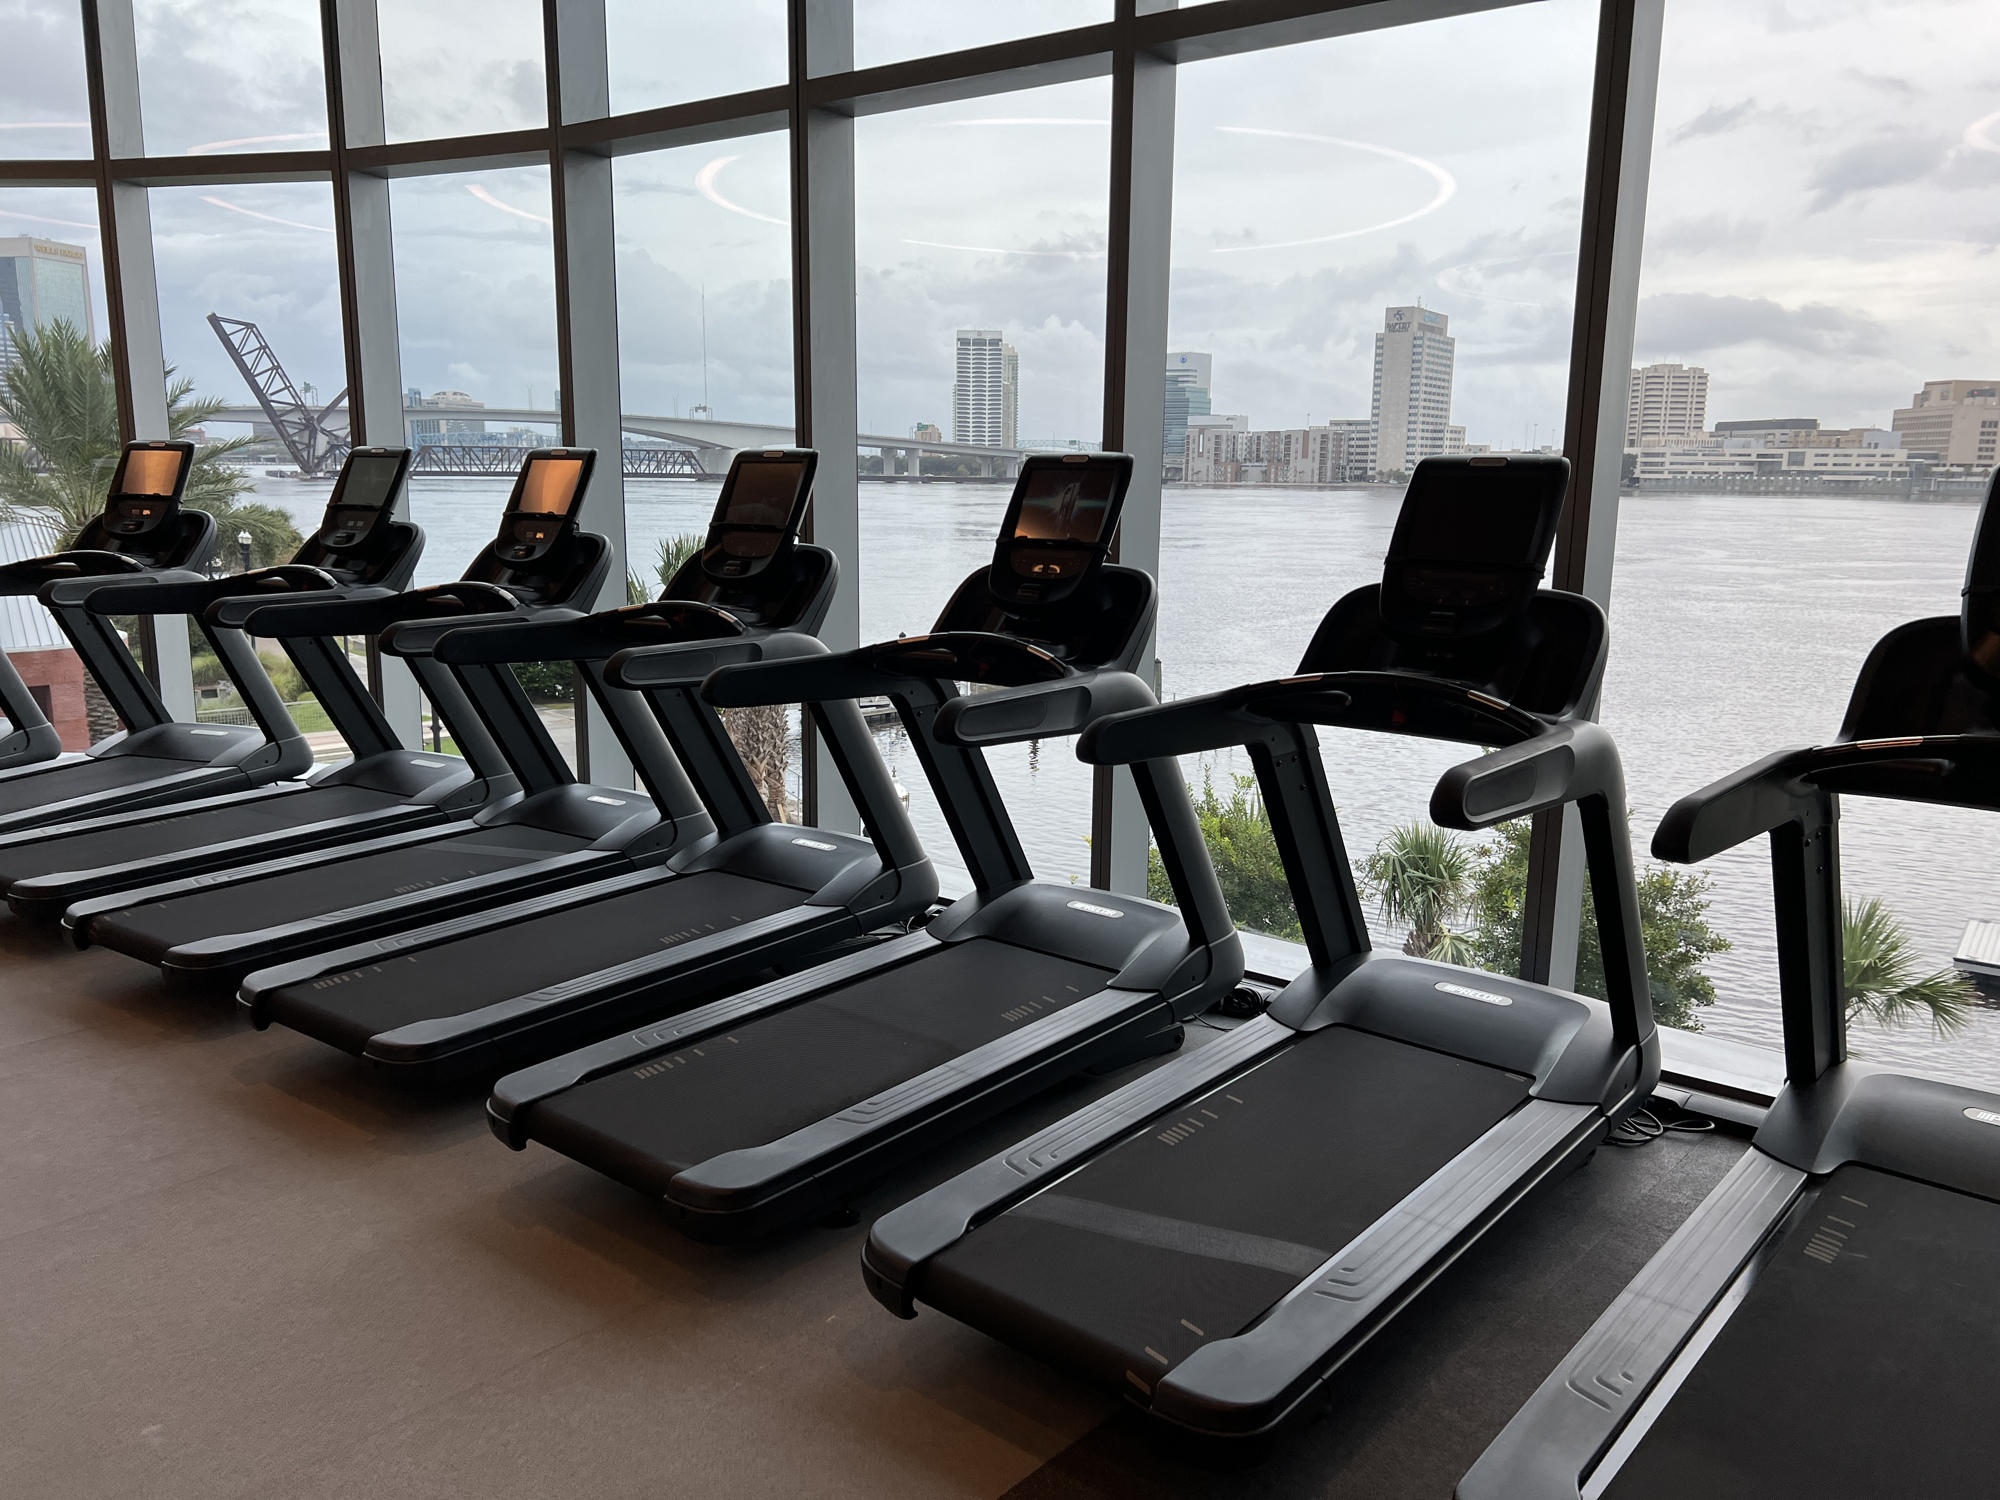 The FIS gym has several aerobic machines that provide a river view while working out. The gym is operated by the Winston YMCA and FIS employees have a free individual membership to those facilities as well.